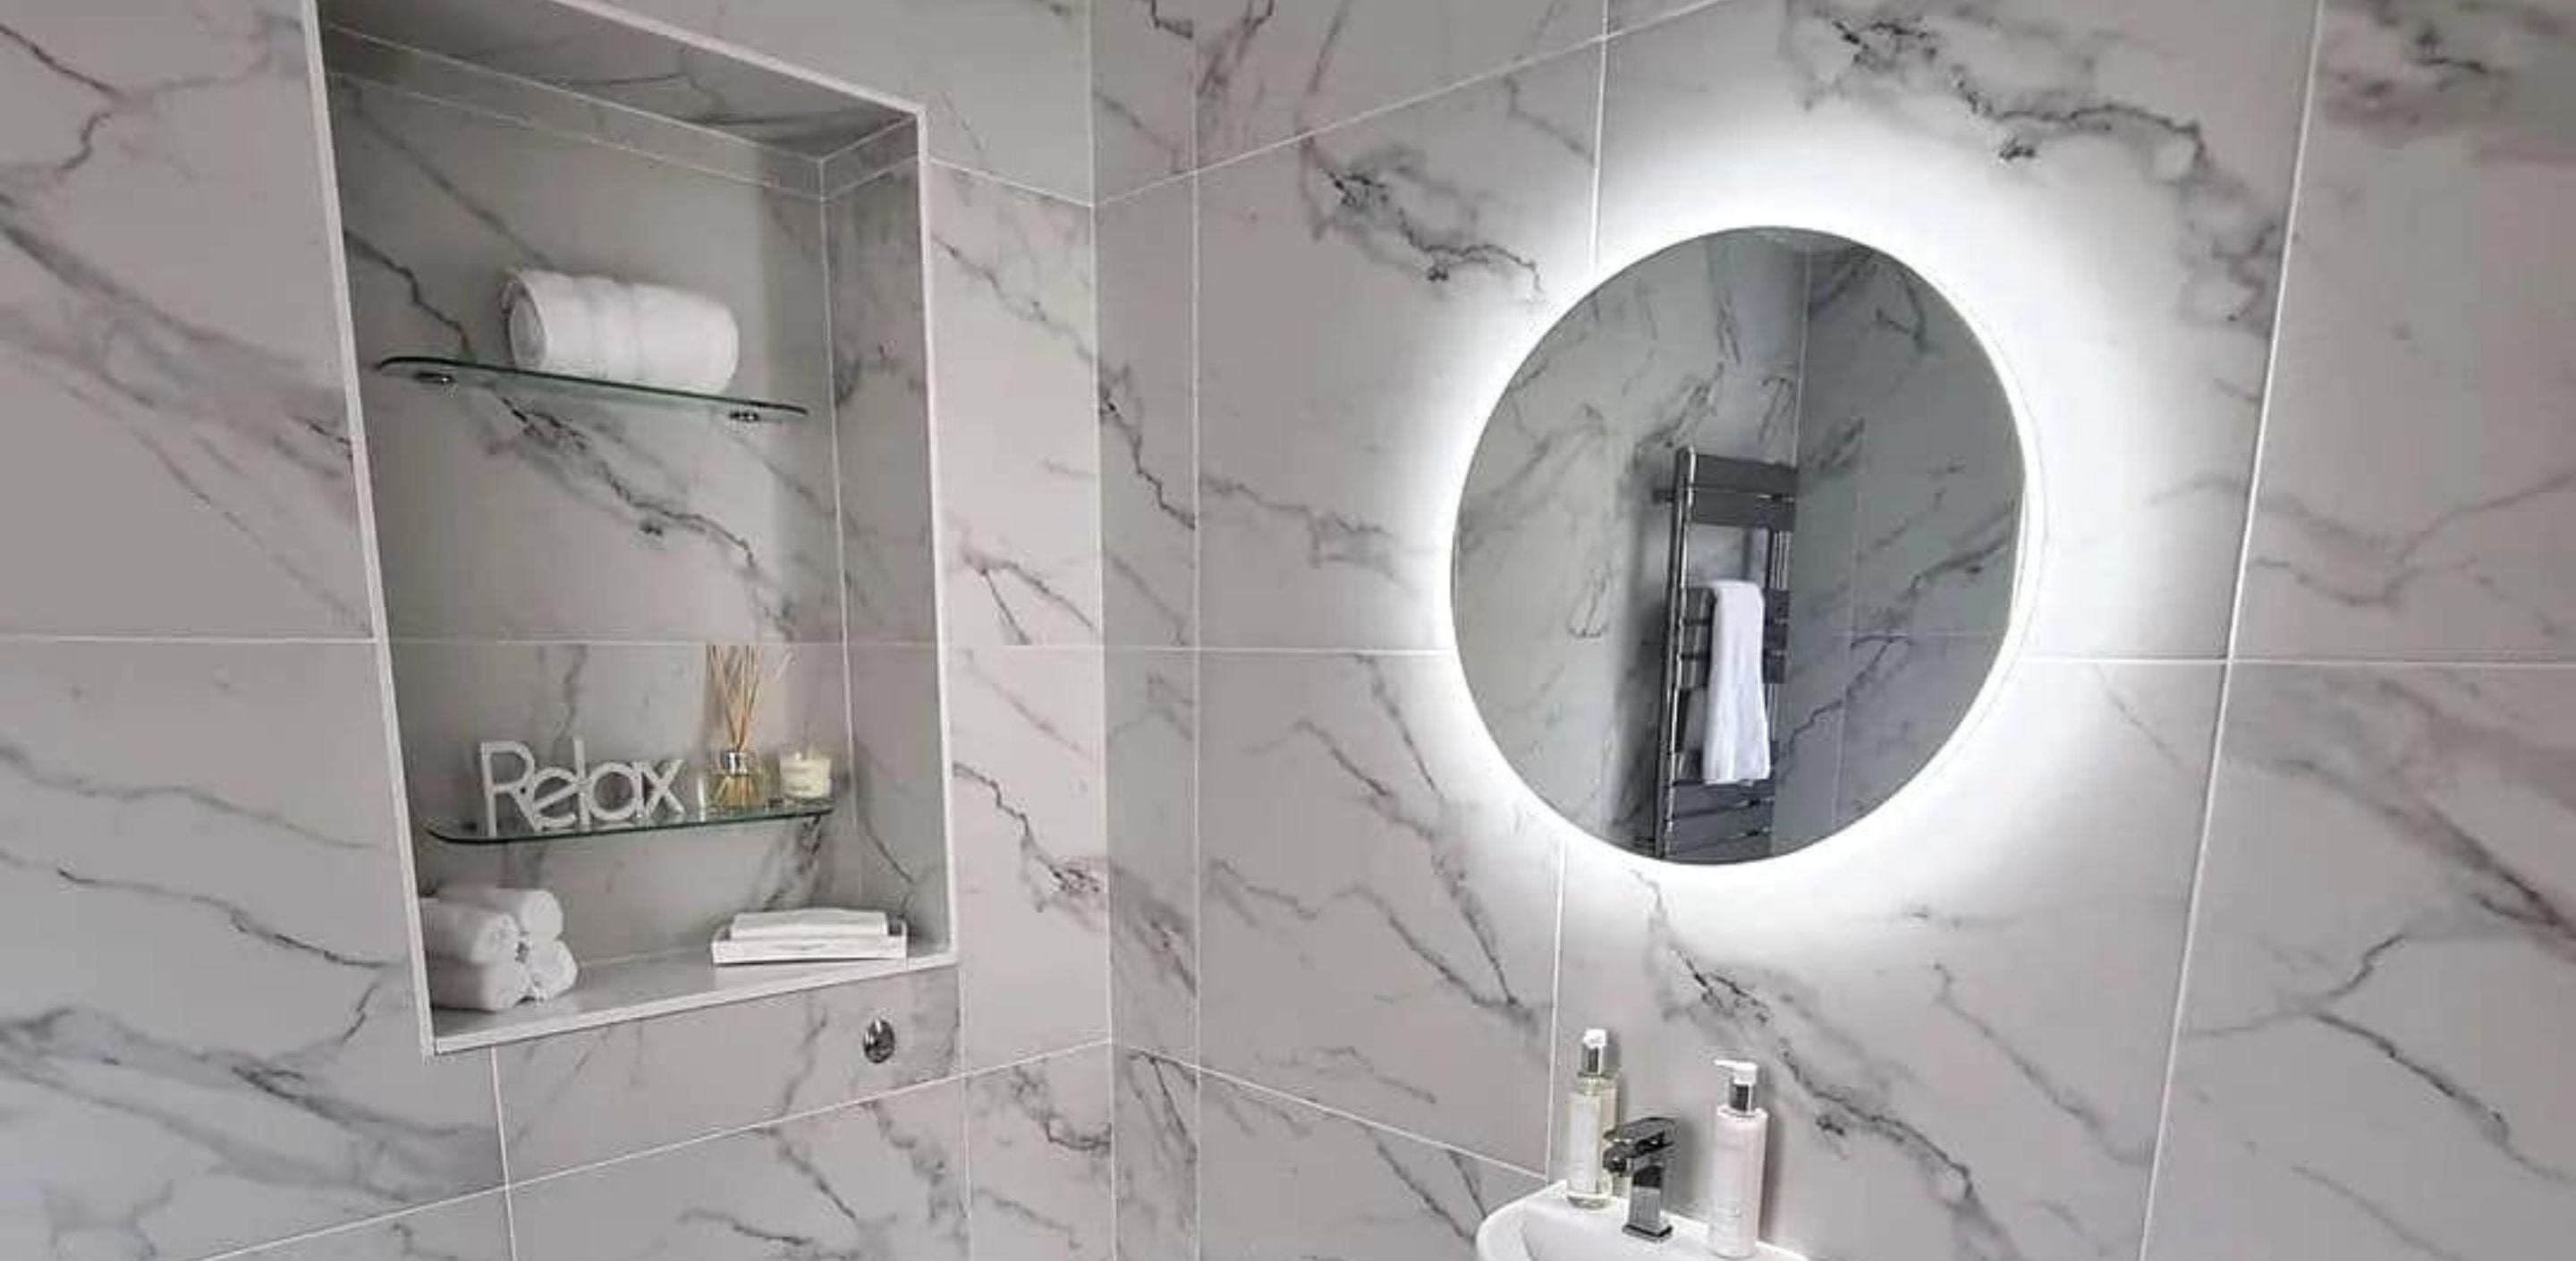 How to add light to a bathroom without a window